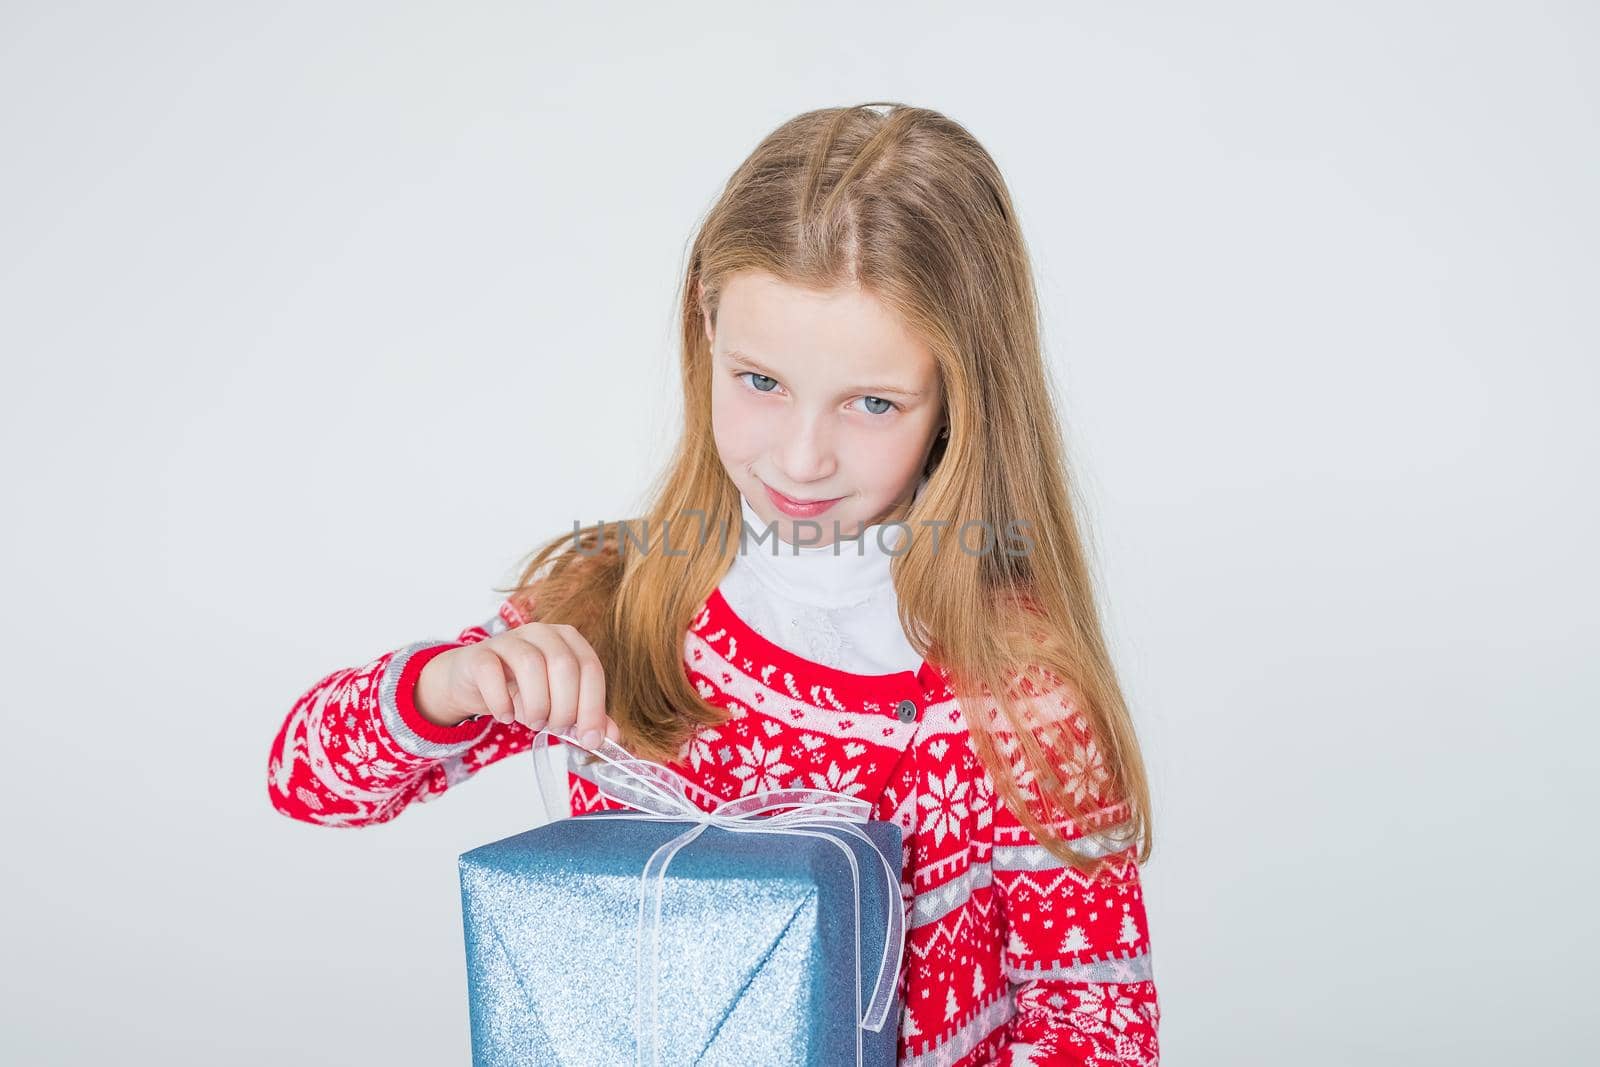 happy little girl with long hair open box with christmas present, isolated on white background.Cheerful handsome girl holding gift with bow in hands and smiling.Copy space by YuliaYaspe1979